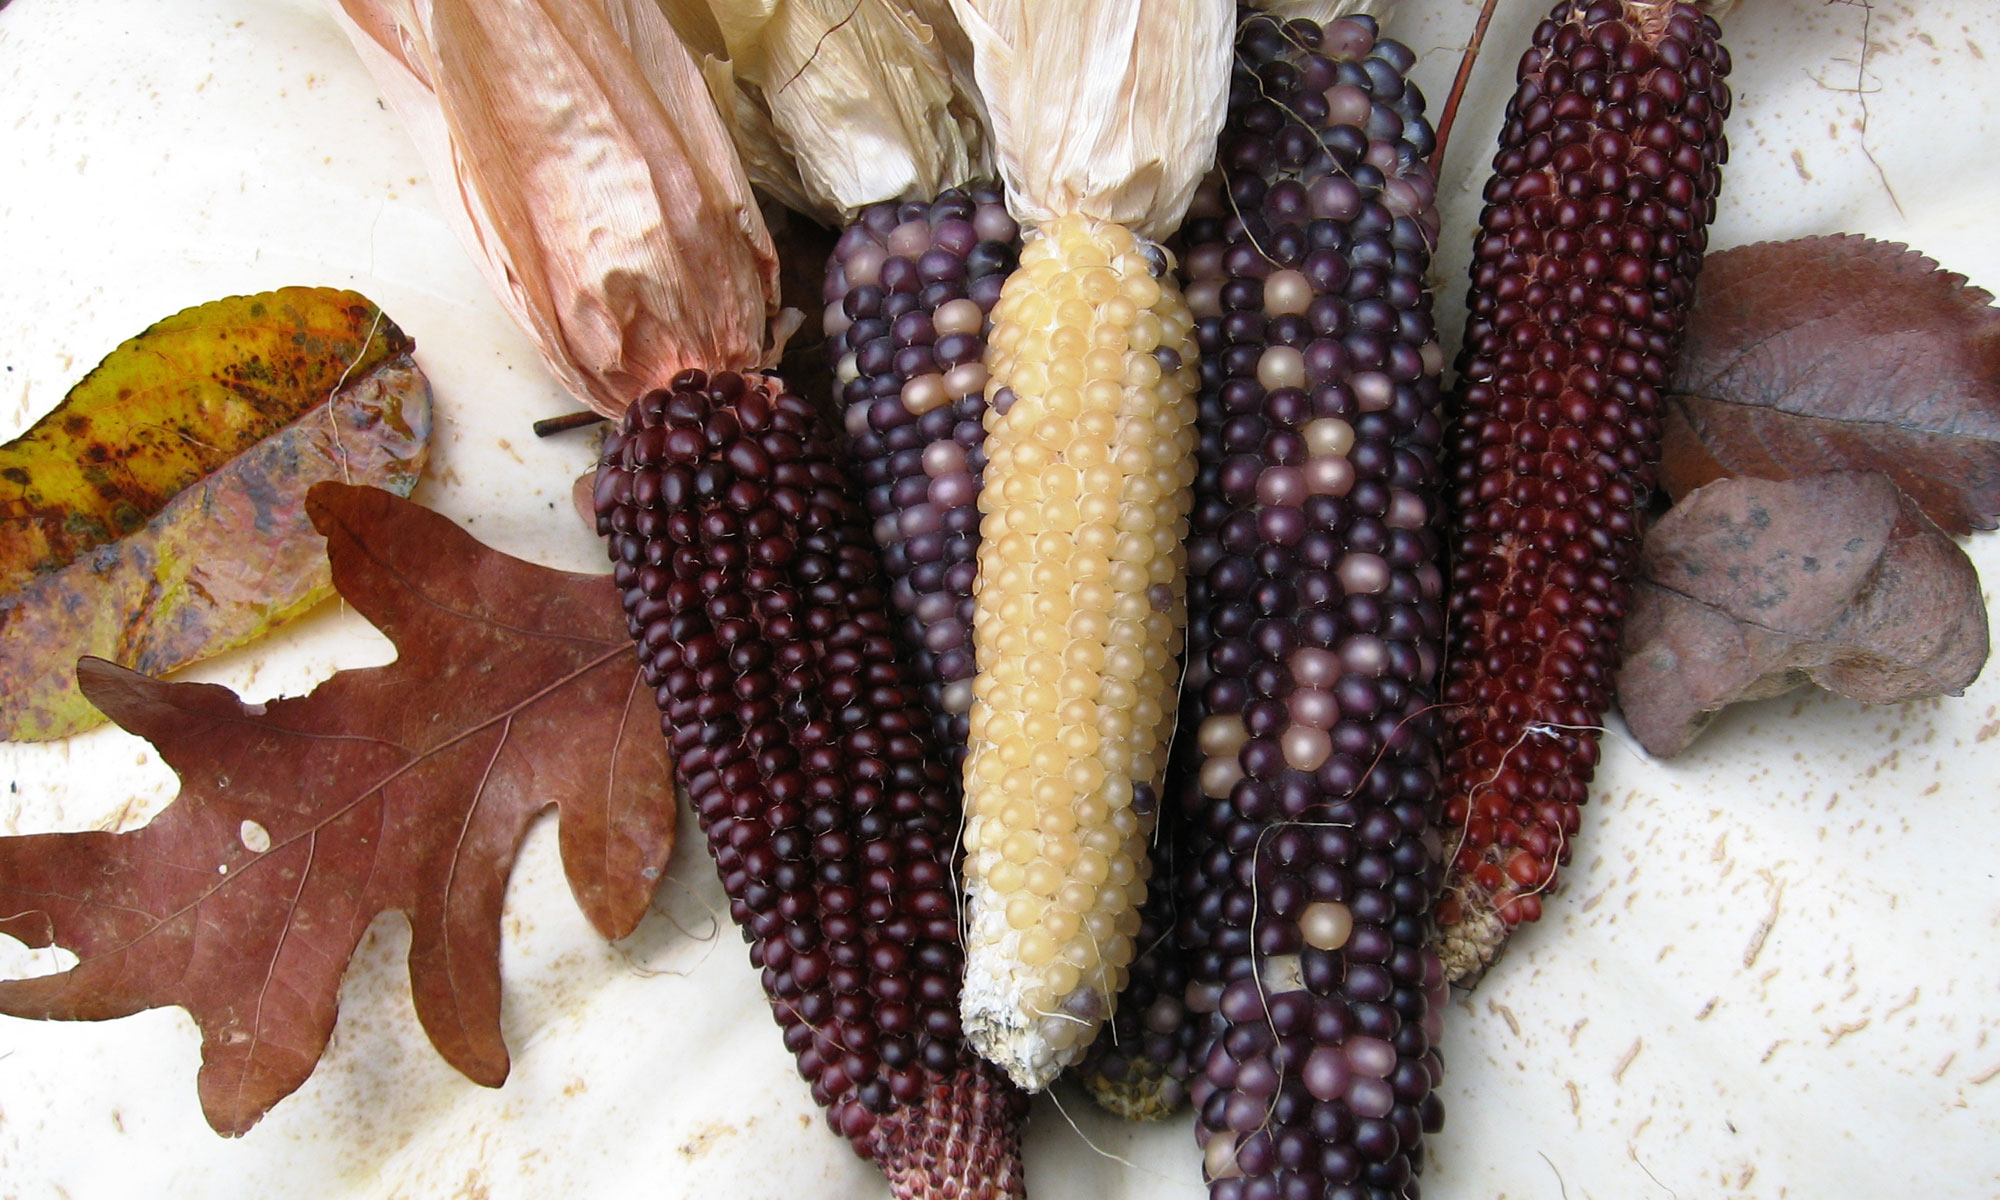 Photograph of ears of popcorn. The photo shows five ears of popcorn in different colors, two deep burgundy, two purple, and one light yellow.